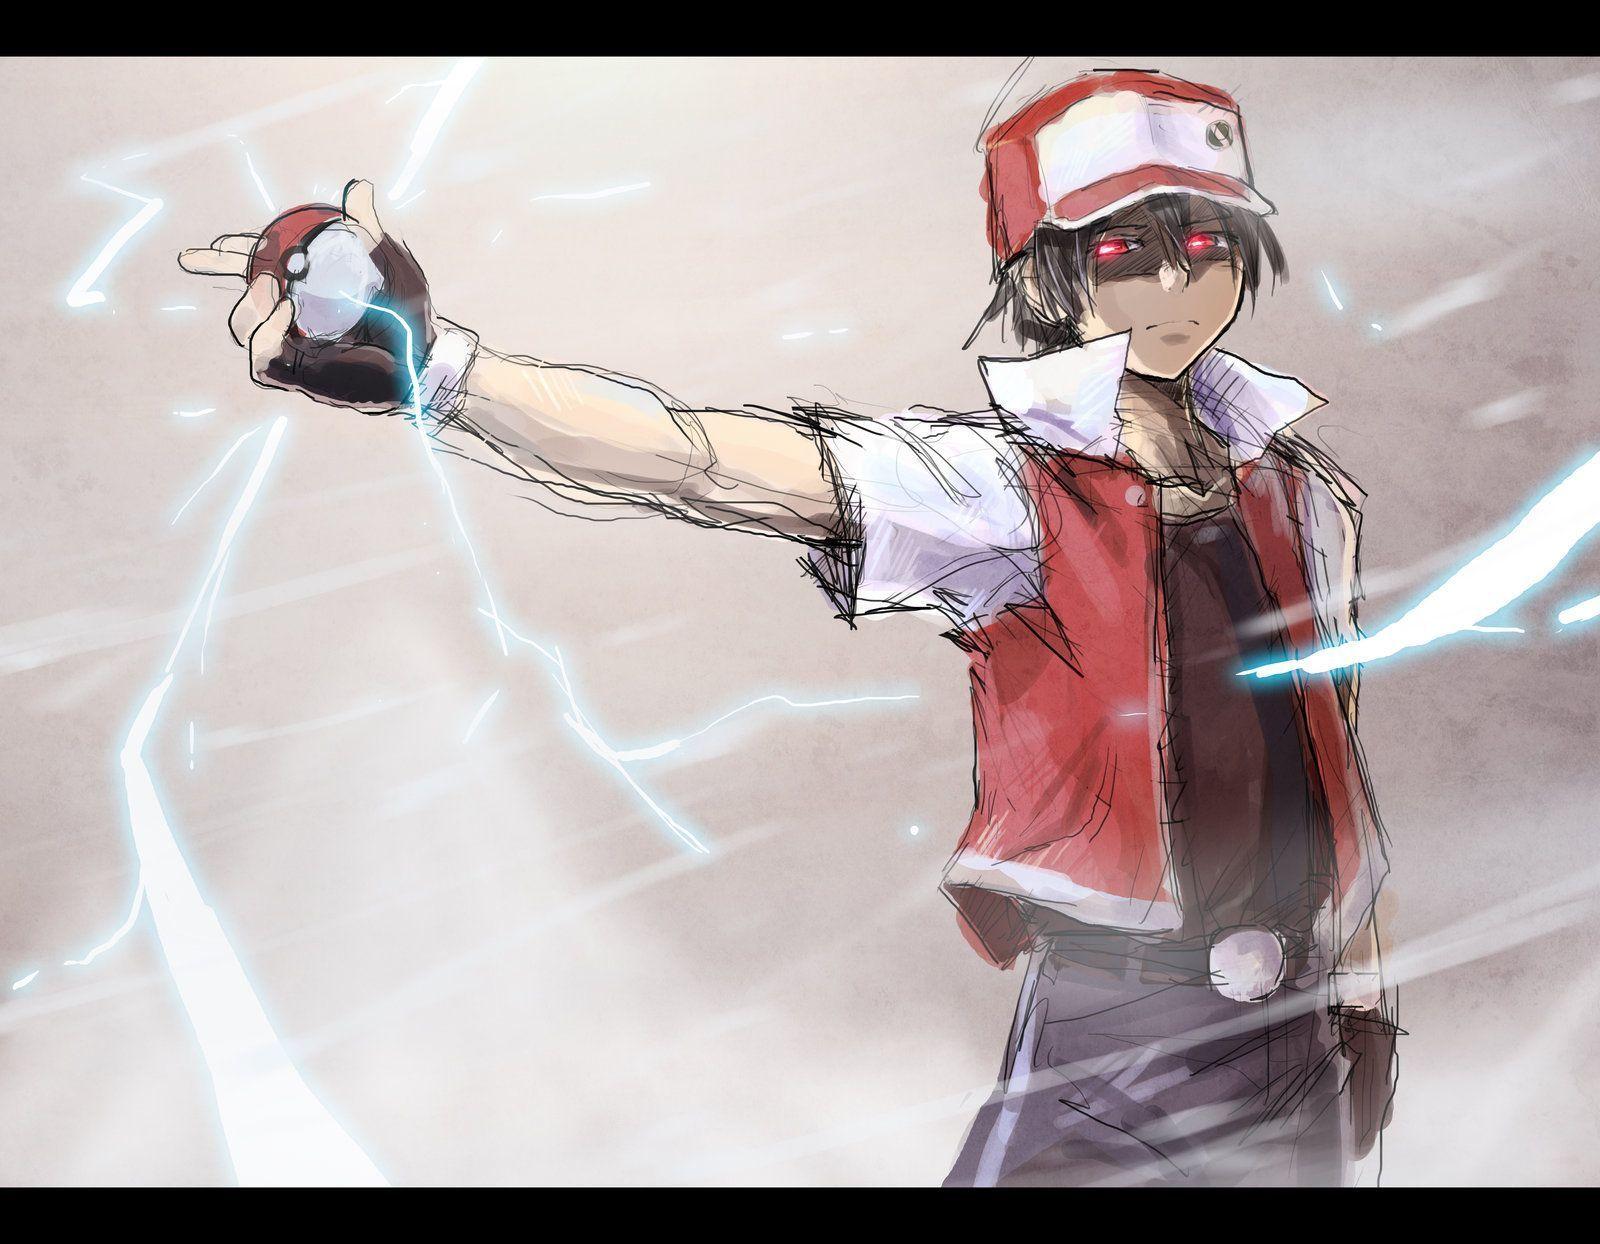 image For > Pokemon Trainer Red Team